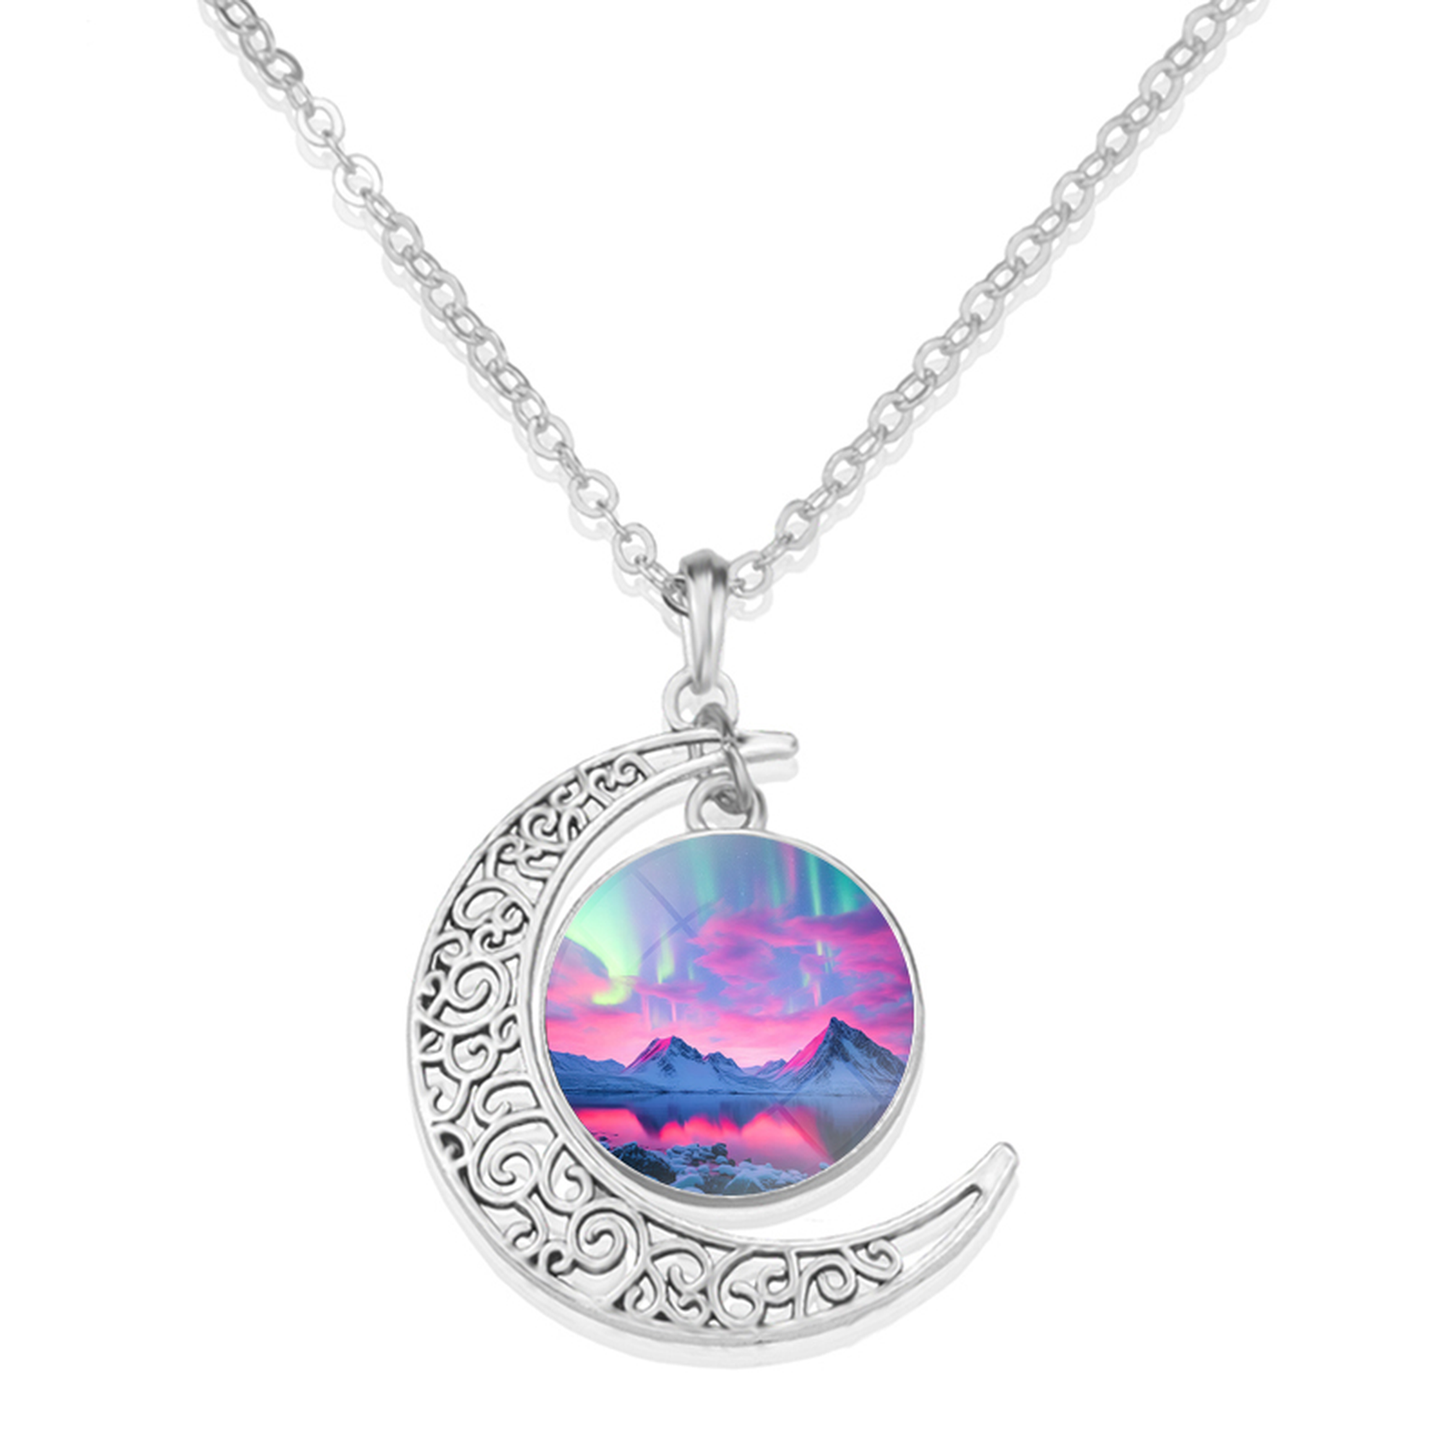 Unique Aurora Borealis Crescent Necklace - Northern Light Jewelry - Crescent Glass Cabochon Pendent Necklace - Perfect Aurora Lovers Gift 10